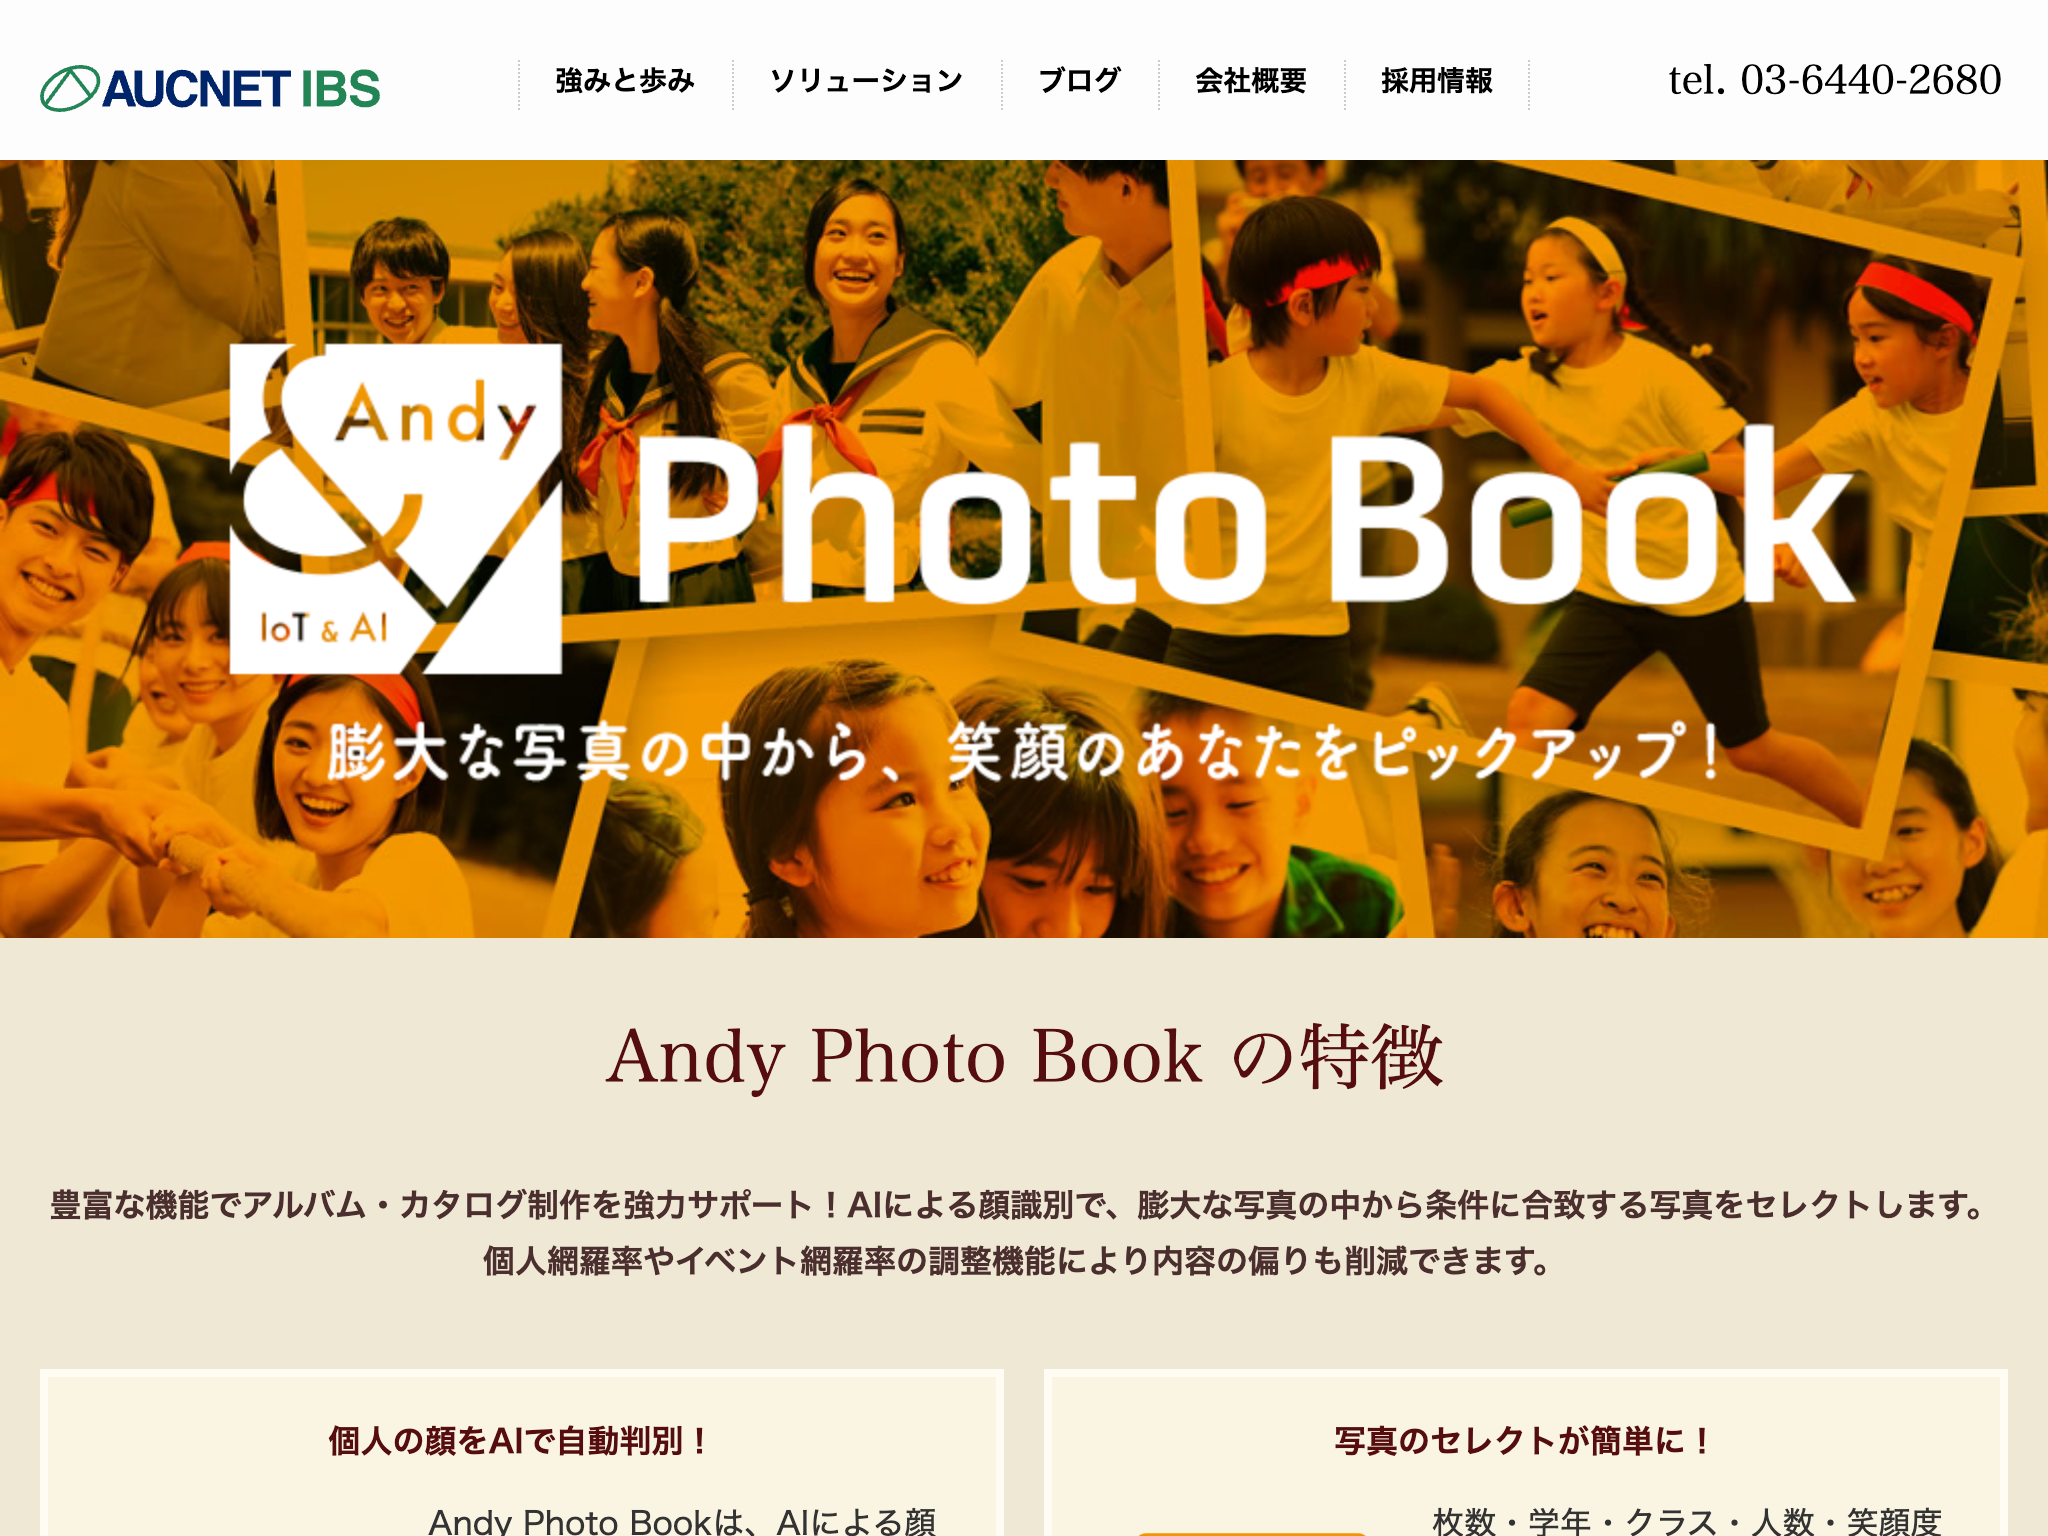 Andy Photo Book